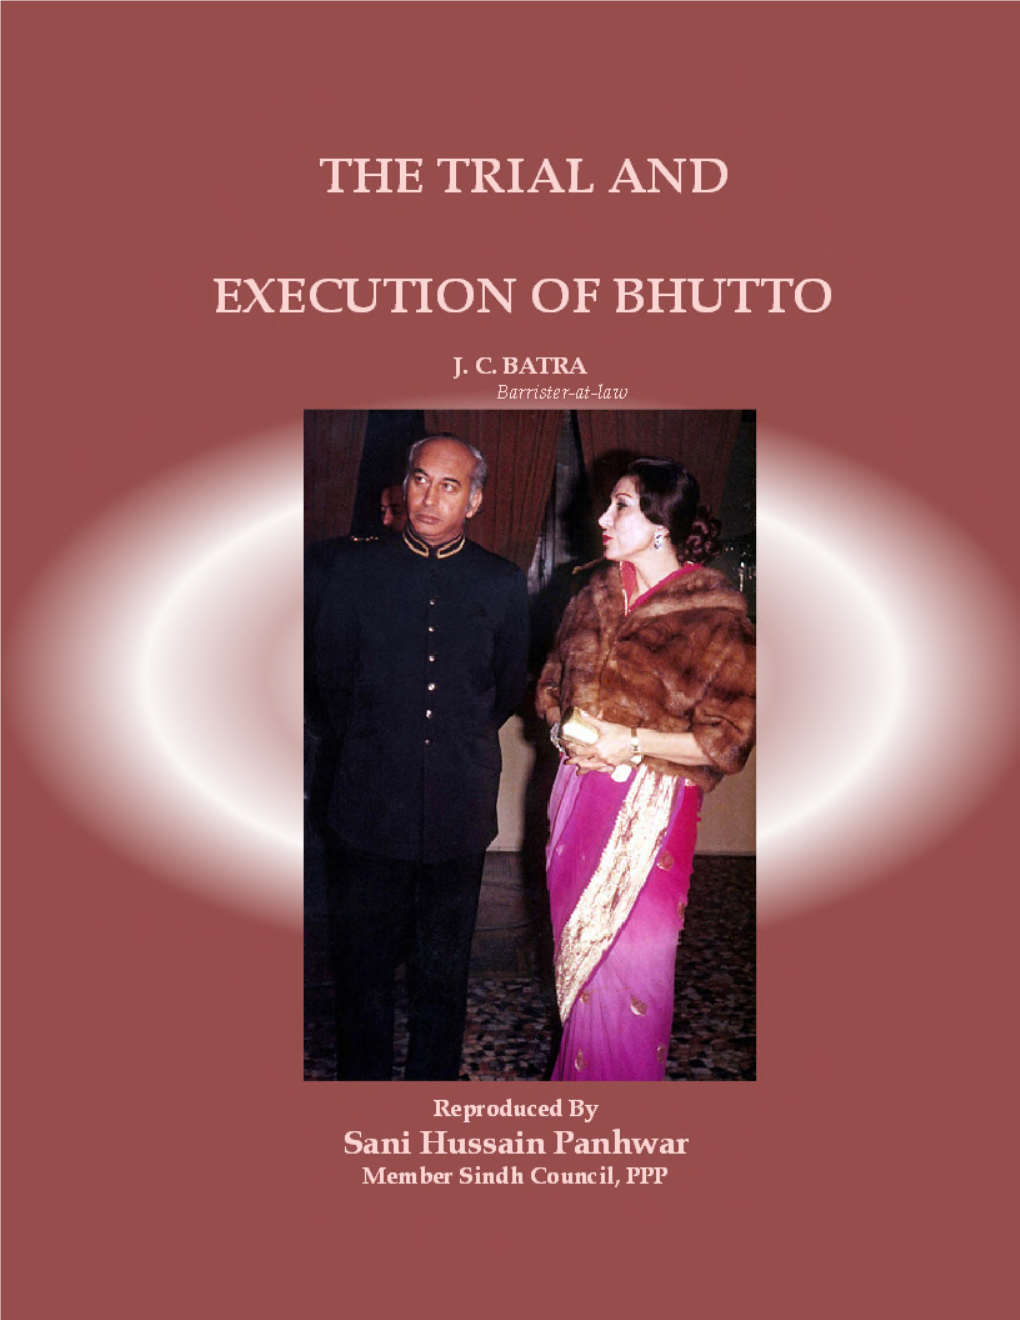 The Trial and Execution of Bhutto by J. C. Batra